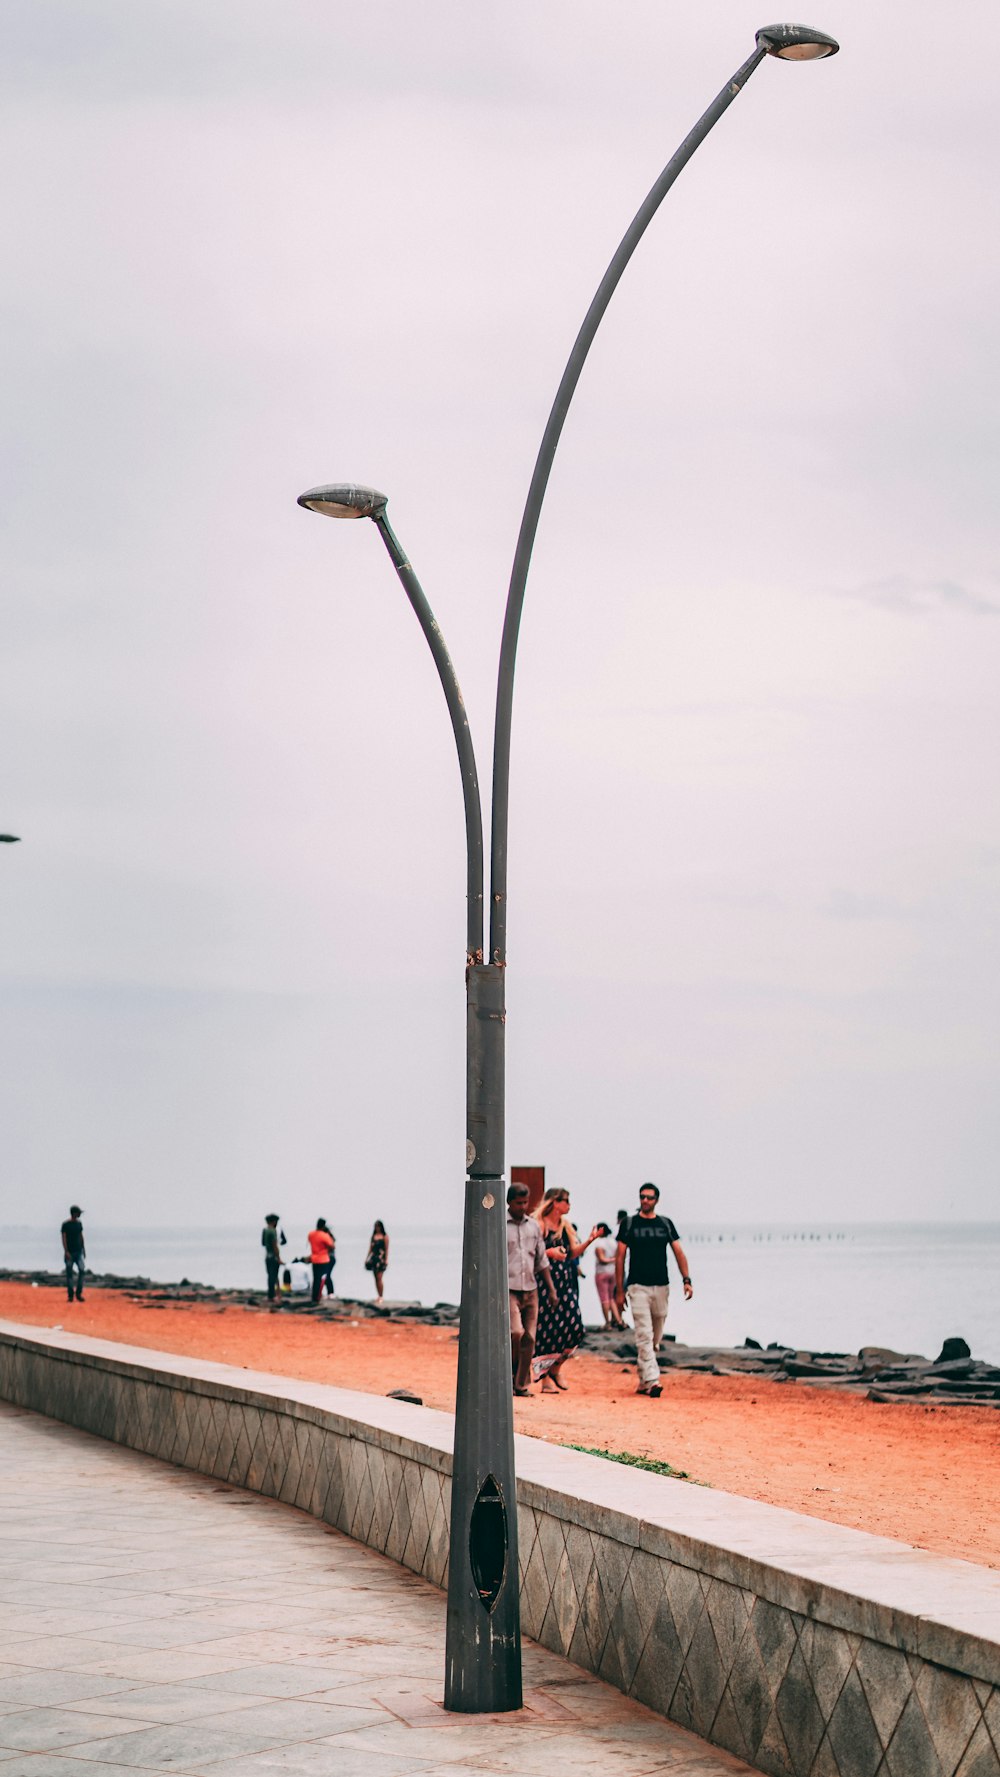 a group of people walking on a beach next to a light pole